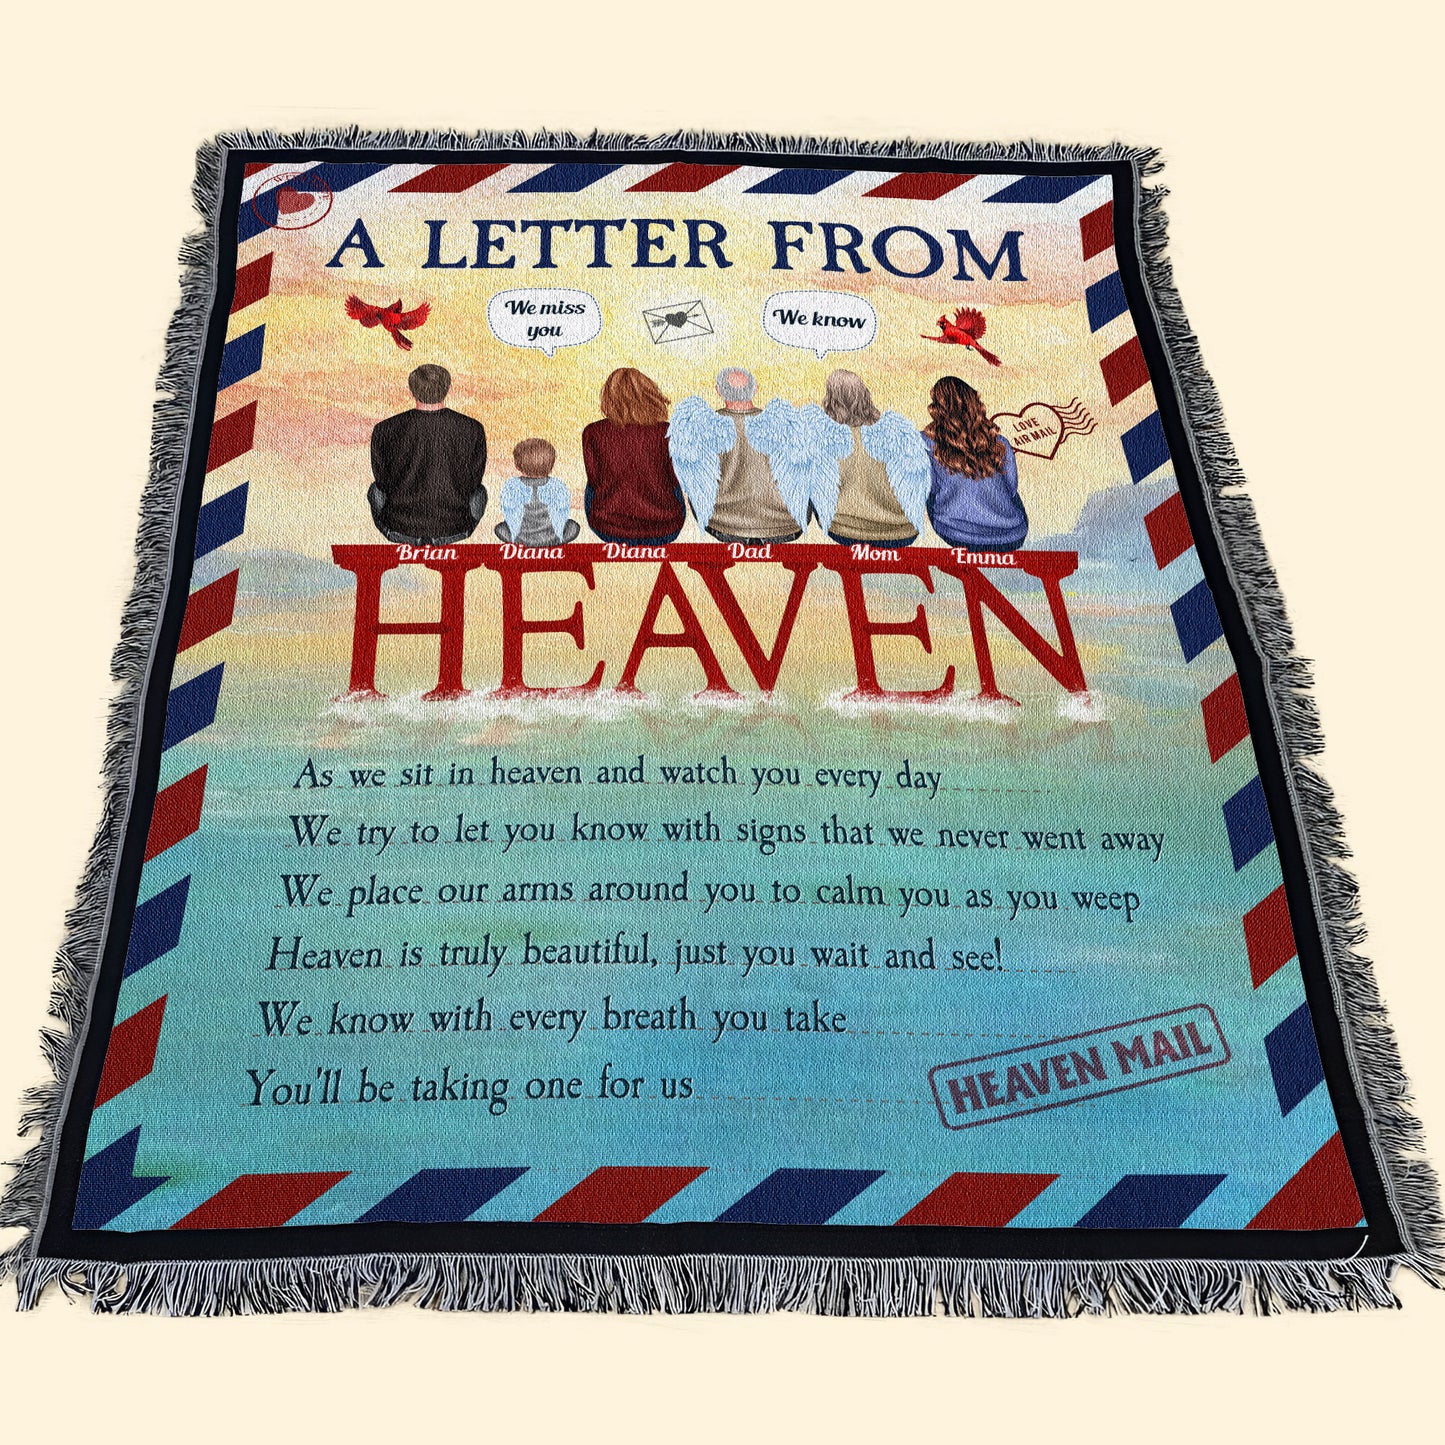 A Letter From Heaven - Personalized Woven Blanket